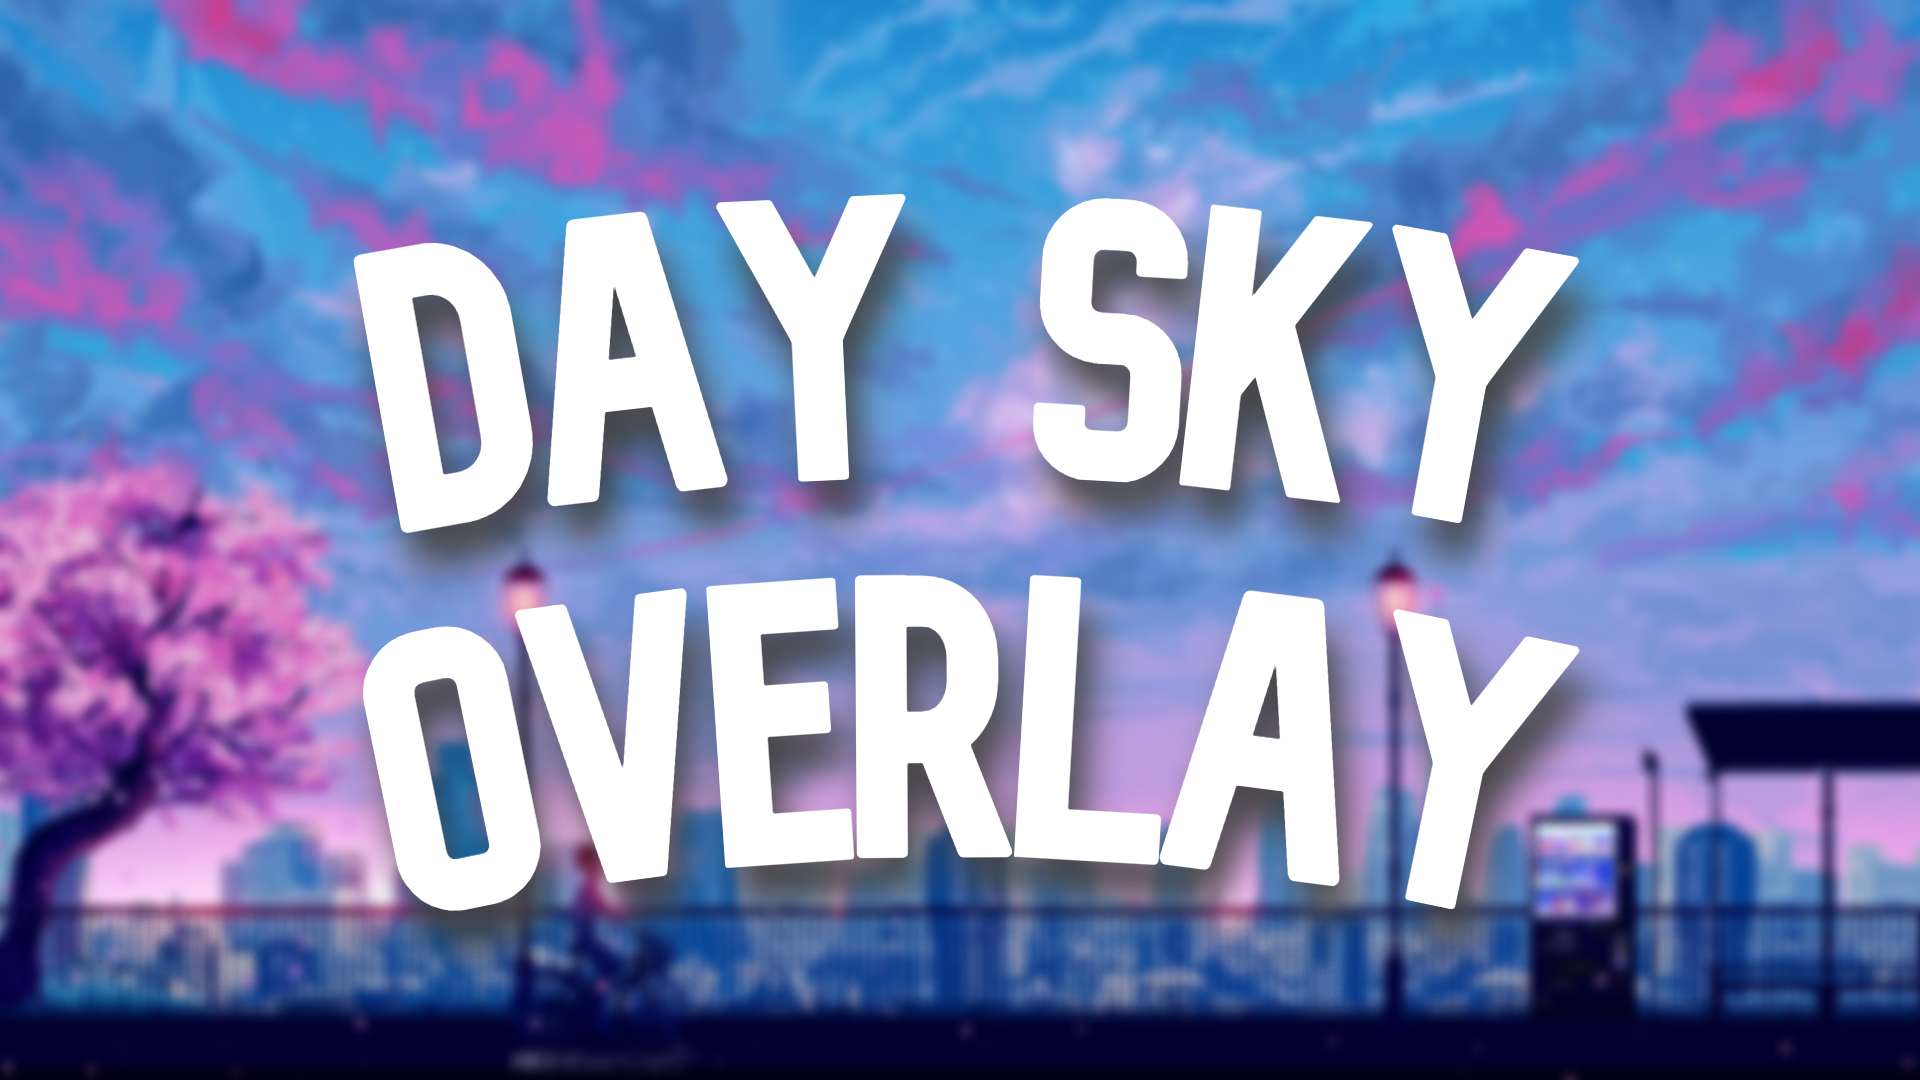 Day Sky Overlay #11 16x by rh56 on PvPRP